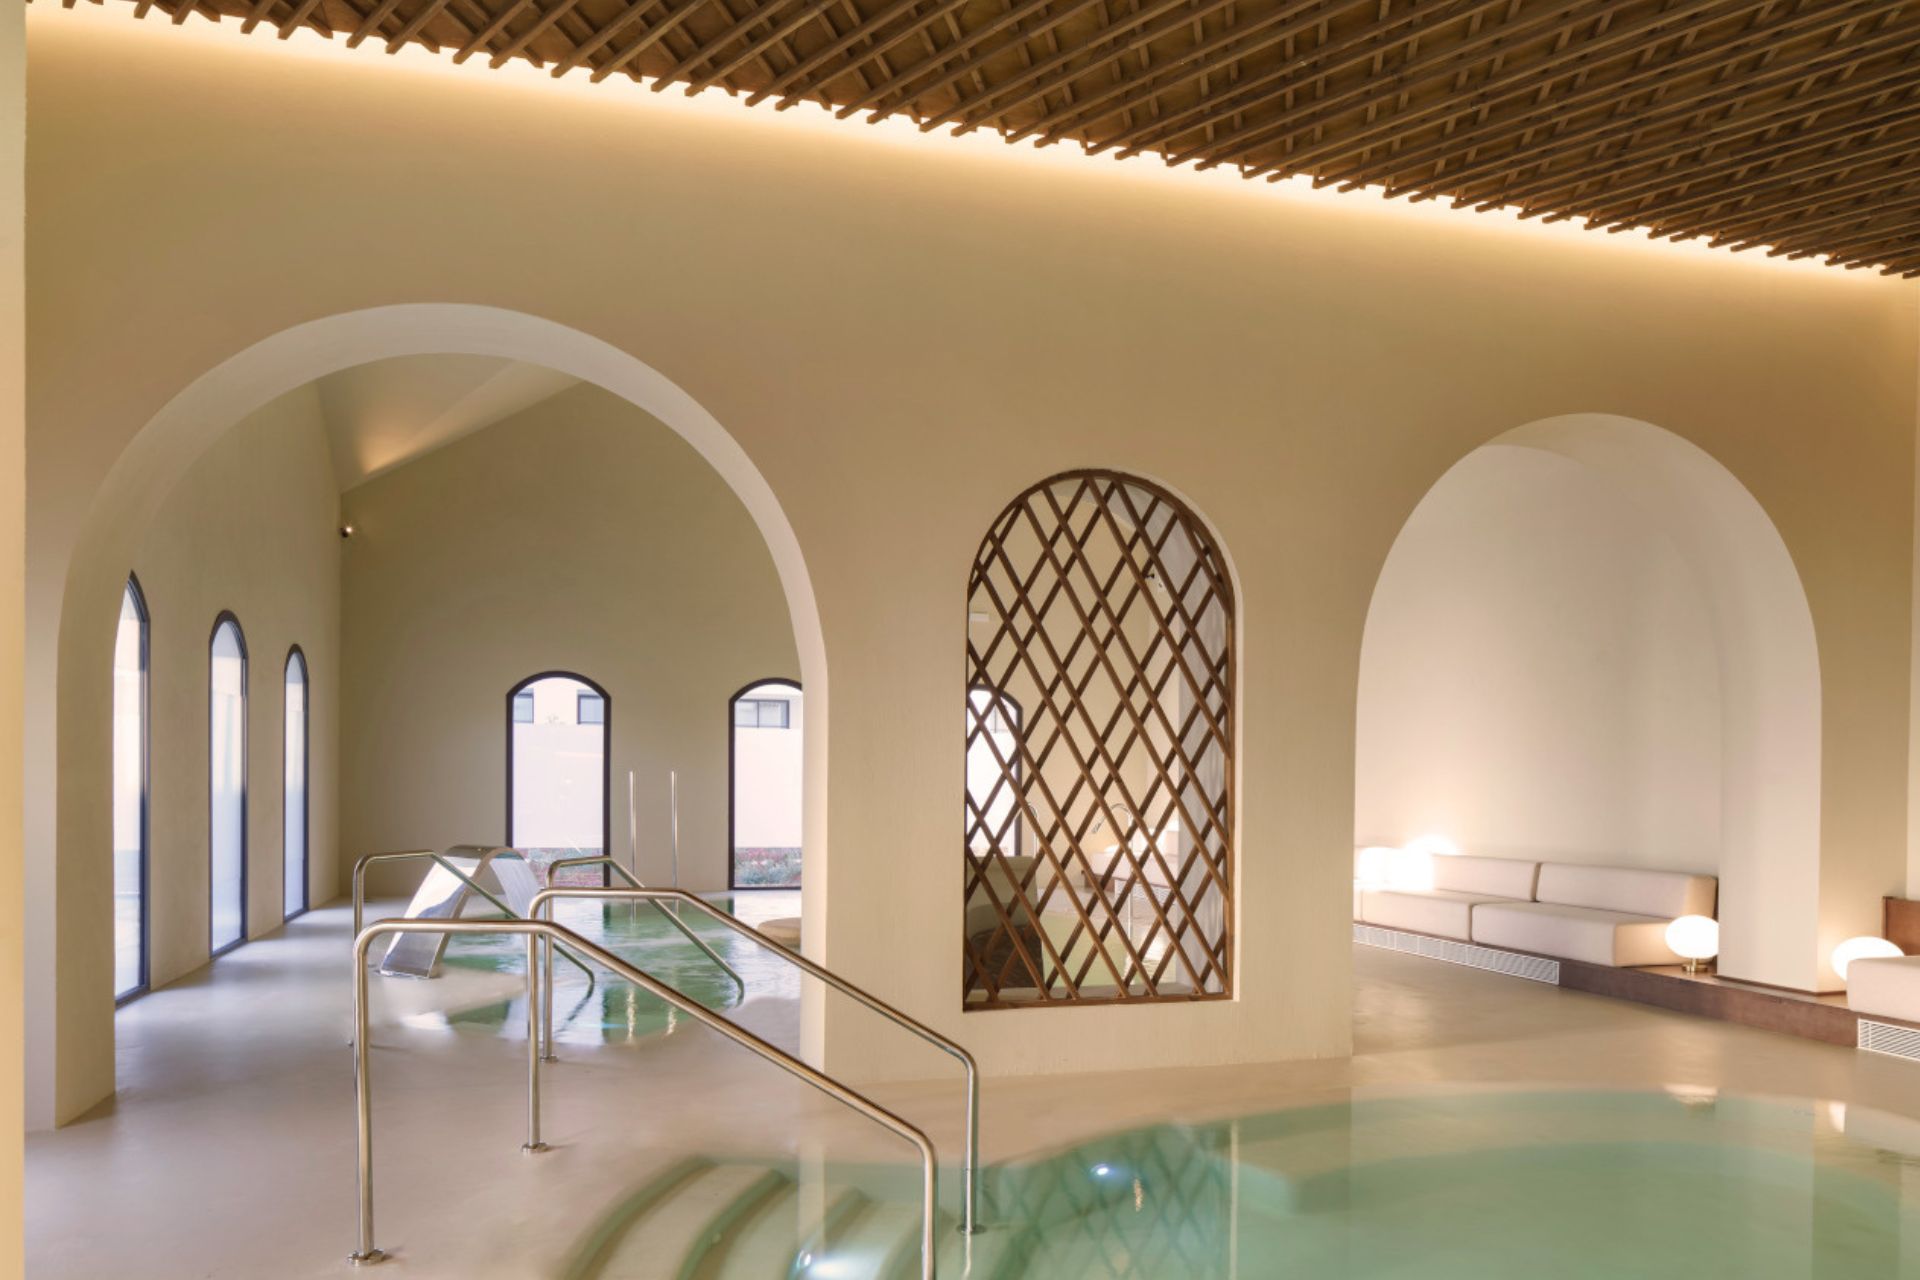 MOOD Spa at La Zambra, with a plunge pool, arched windows and wooden latticework on the ceilings.